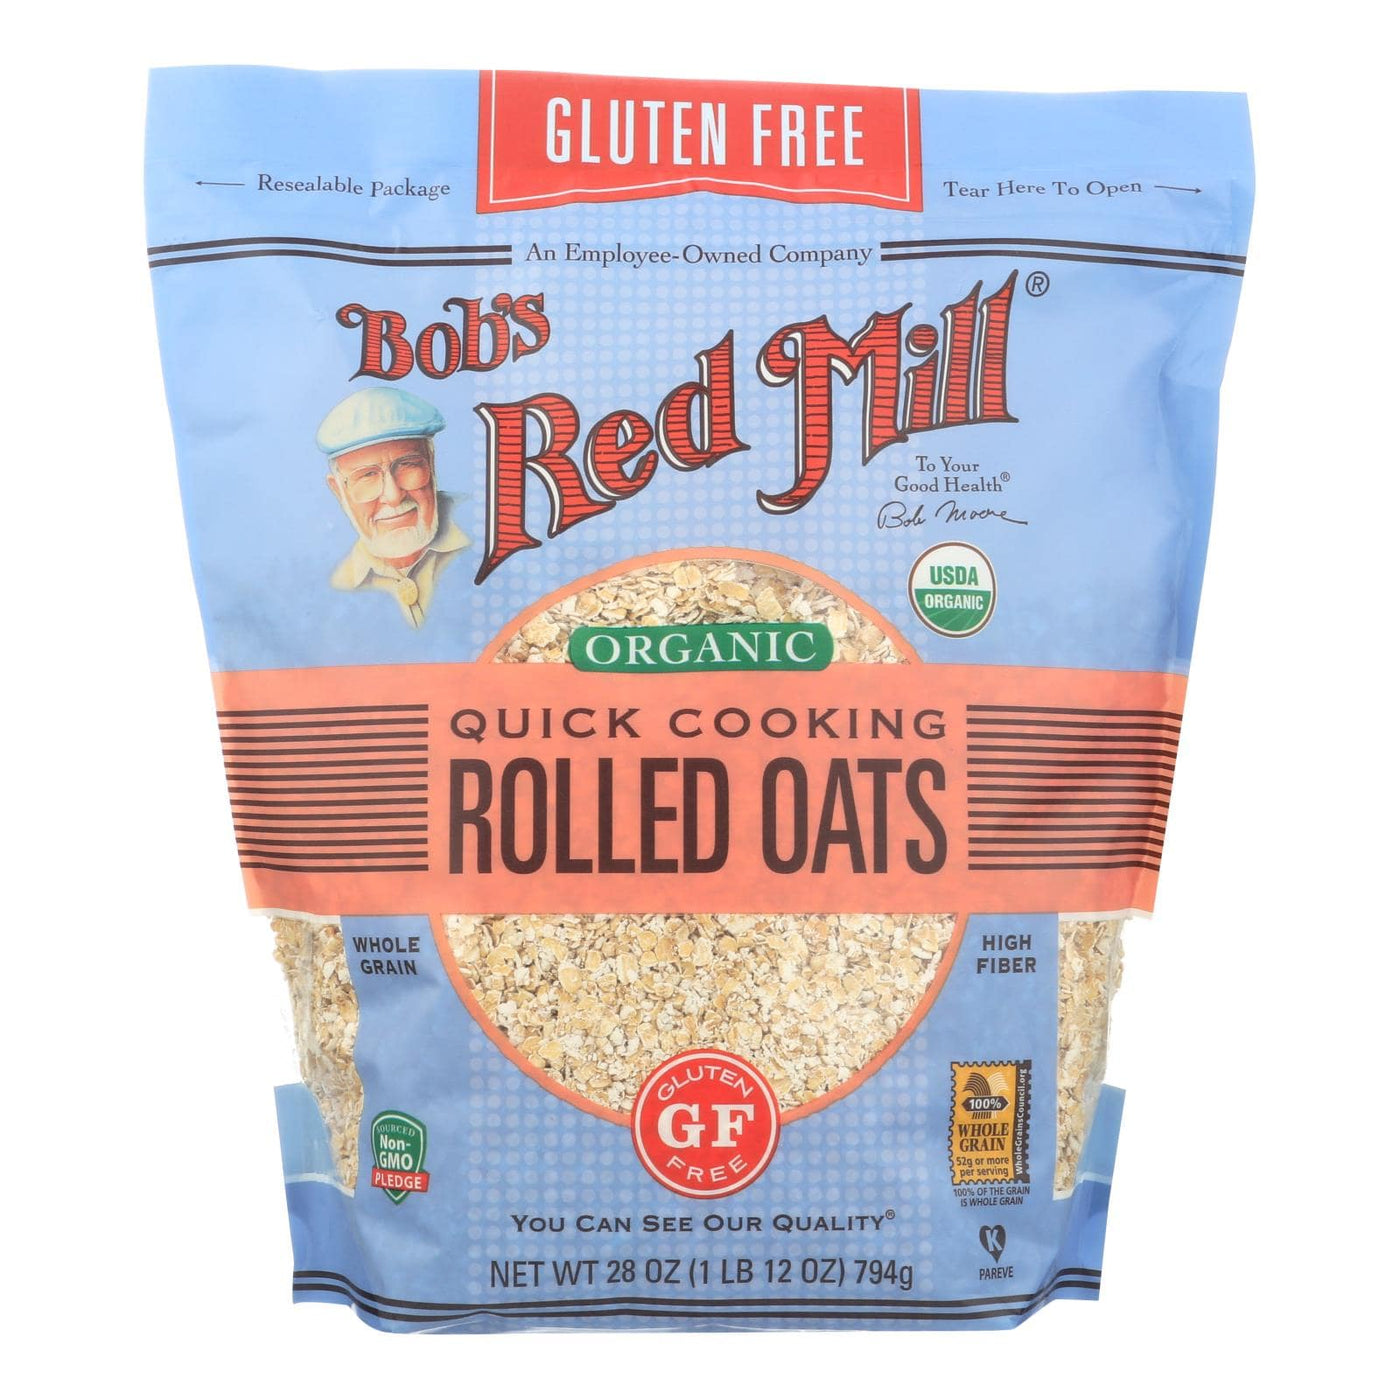 Bob's Red Mill - Organic Quick Cooking Rolled Oats - Gluten Free - Case Of 4-28 Oz | OnlyNaturals.us